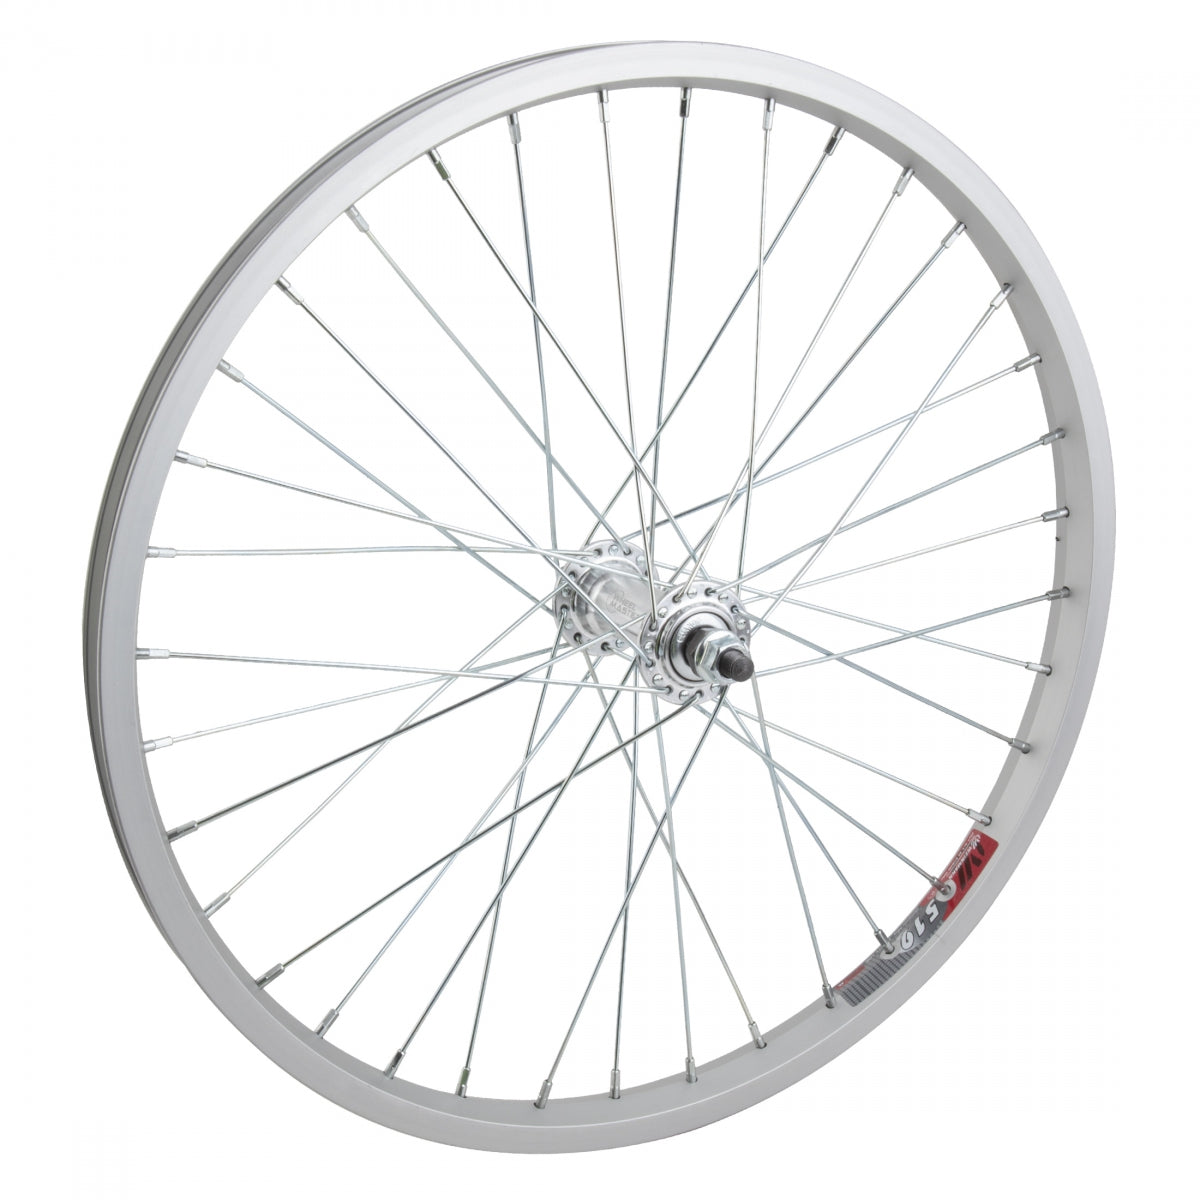 WheelMaster Front Bicycle Wheel, 20 x 1.75, 36H, Alloy, Bolt On, Silver